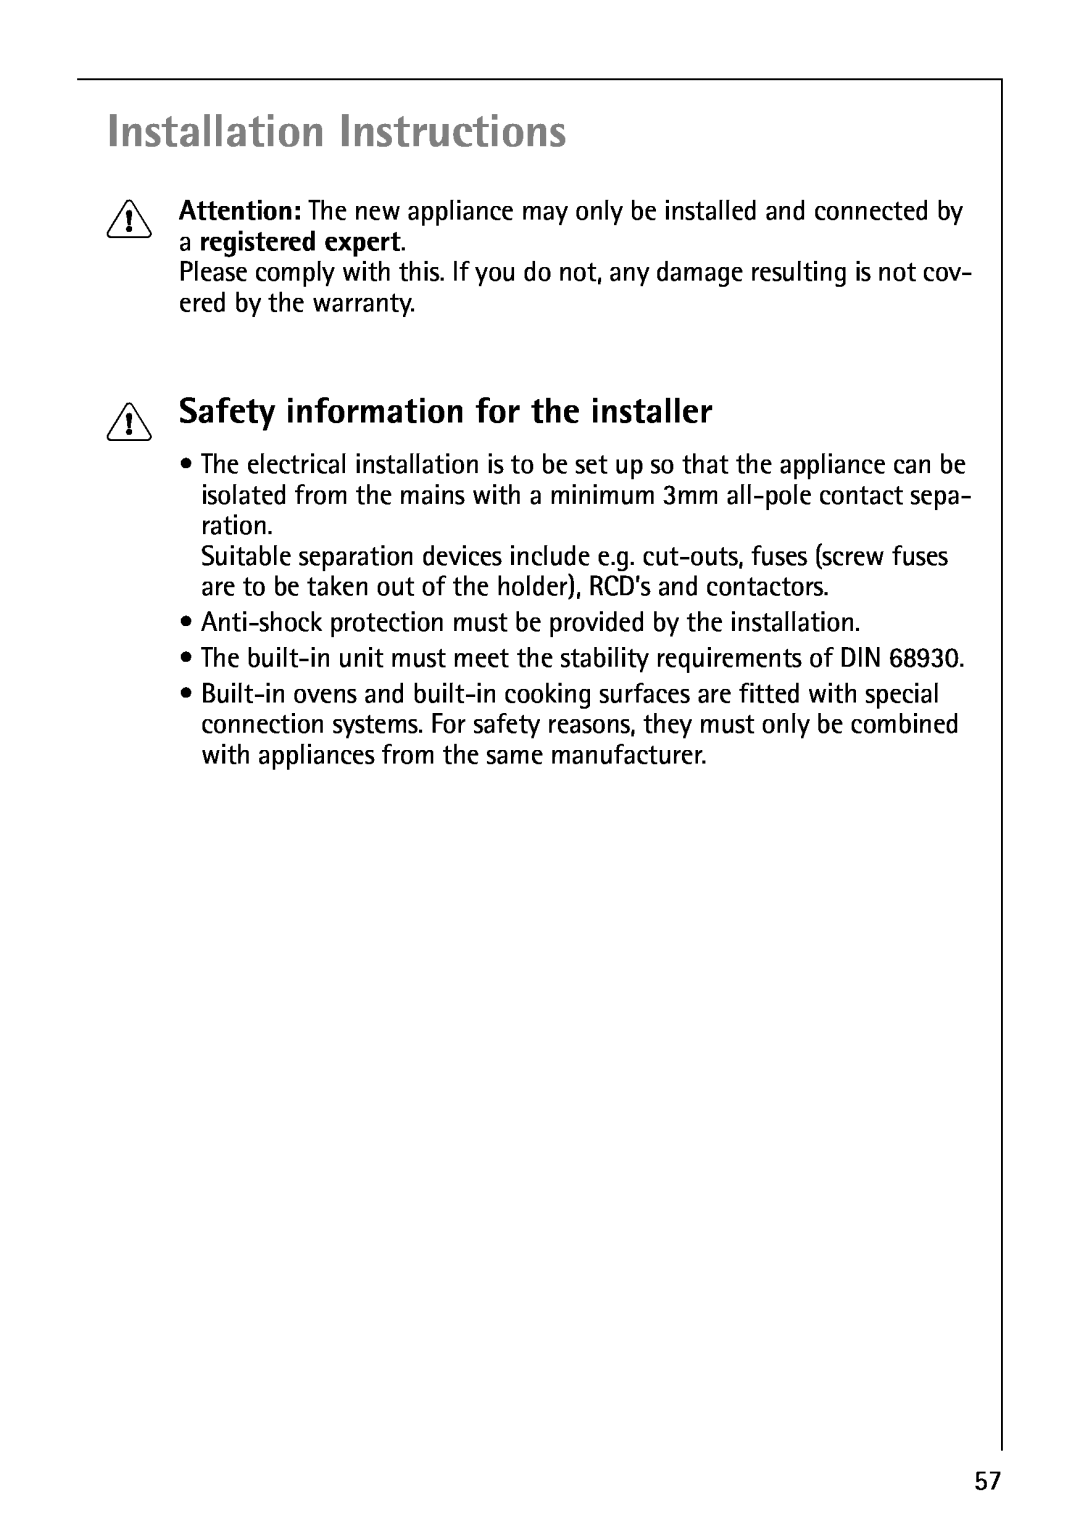 Electrolux B8871-4 manual Installation Instructions, Safety information for the installer, a registered expert 